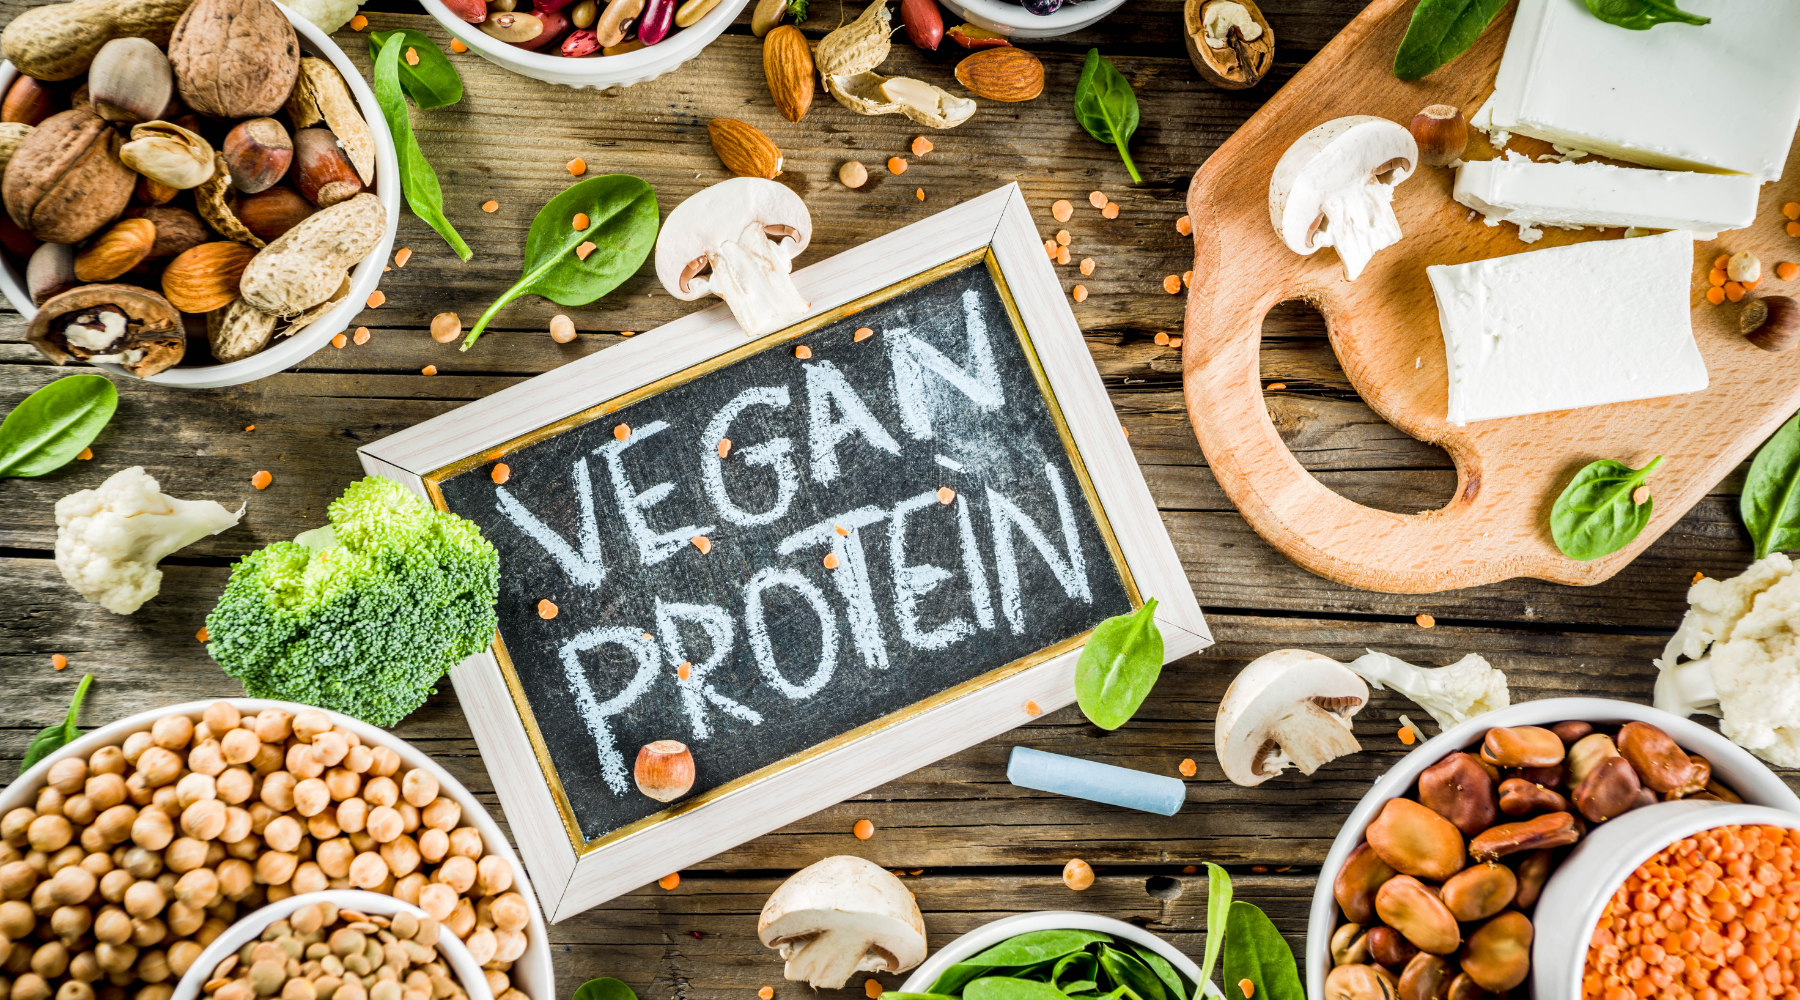 BENEFITS OF PLANT-BASED PROTEIN